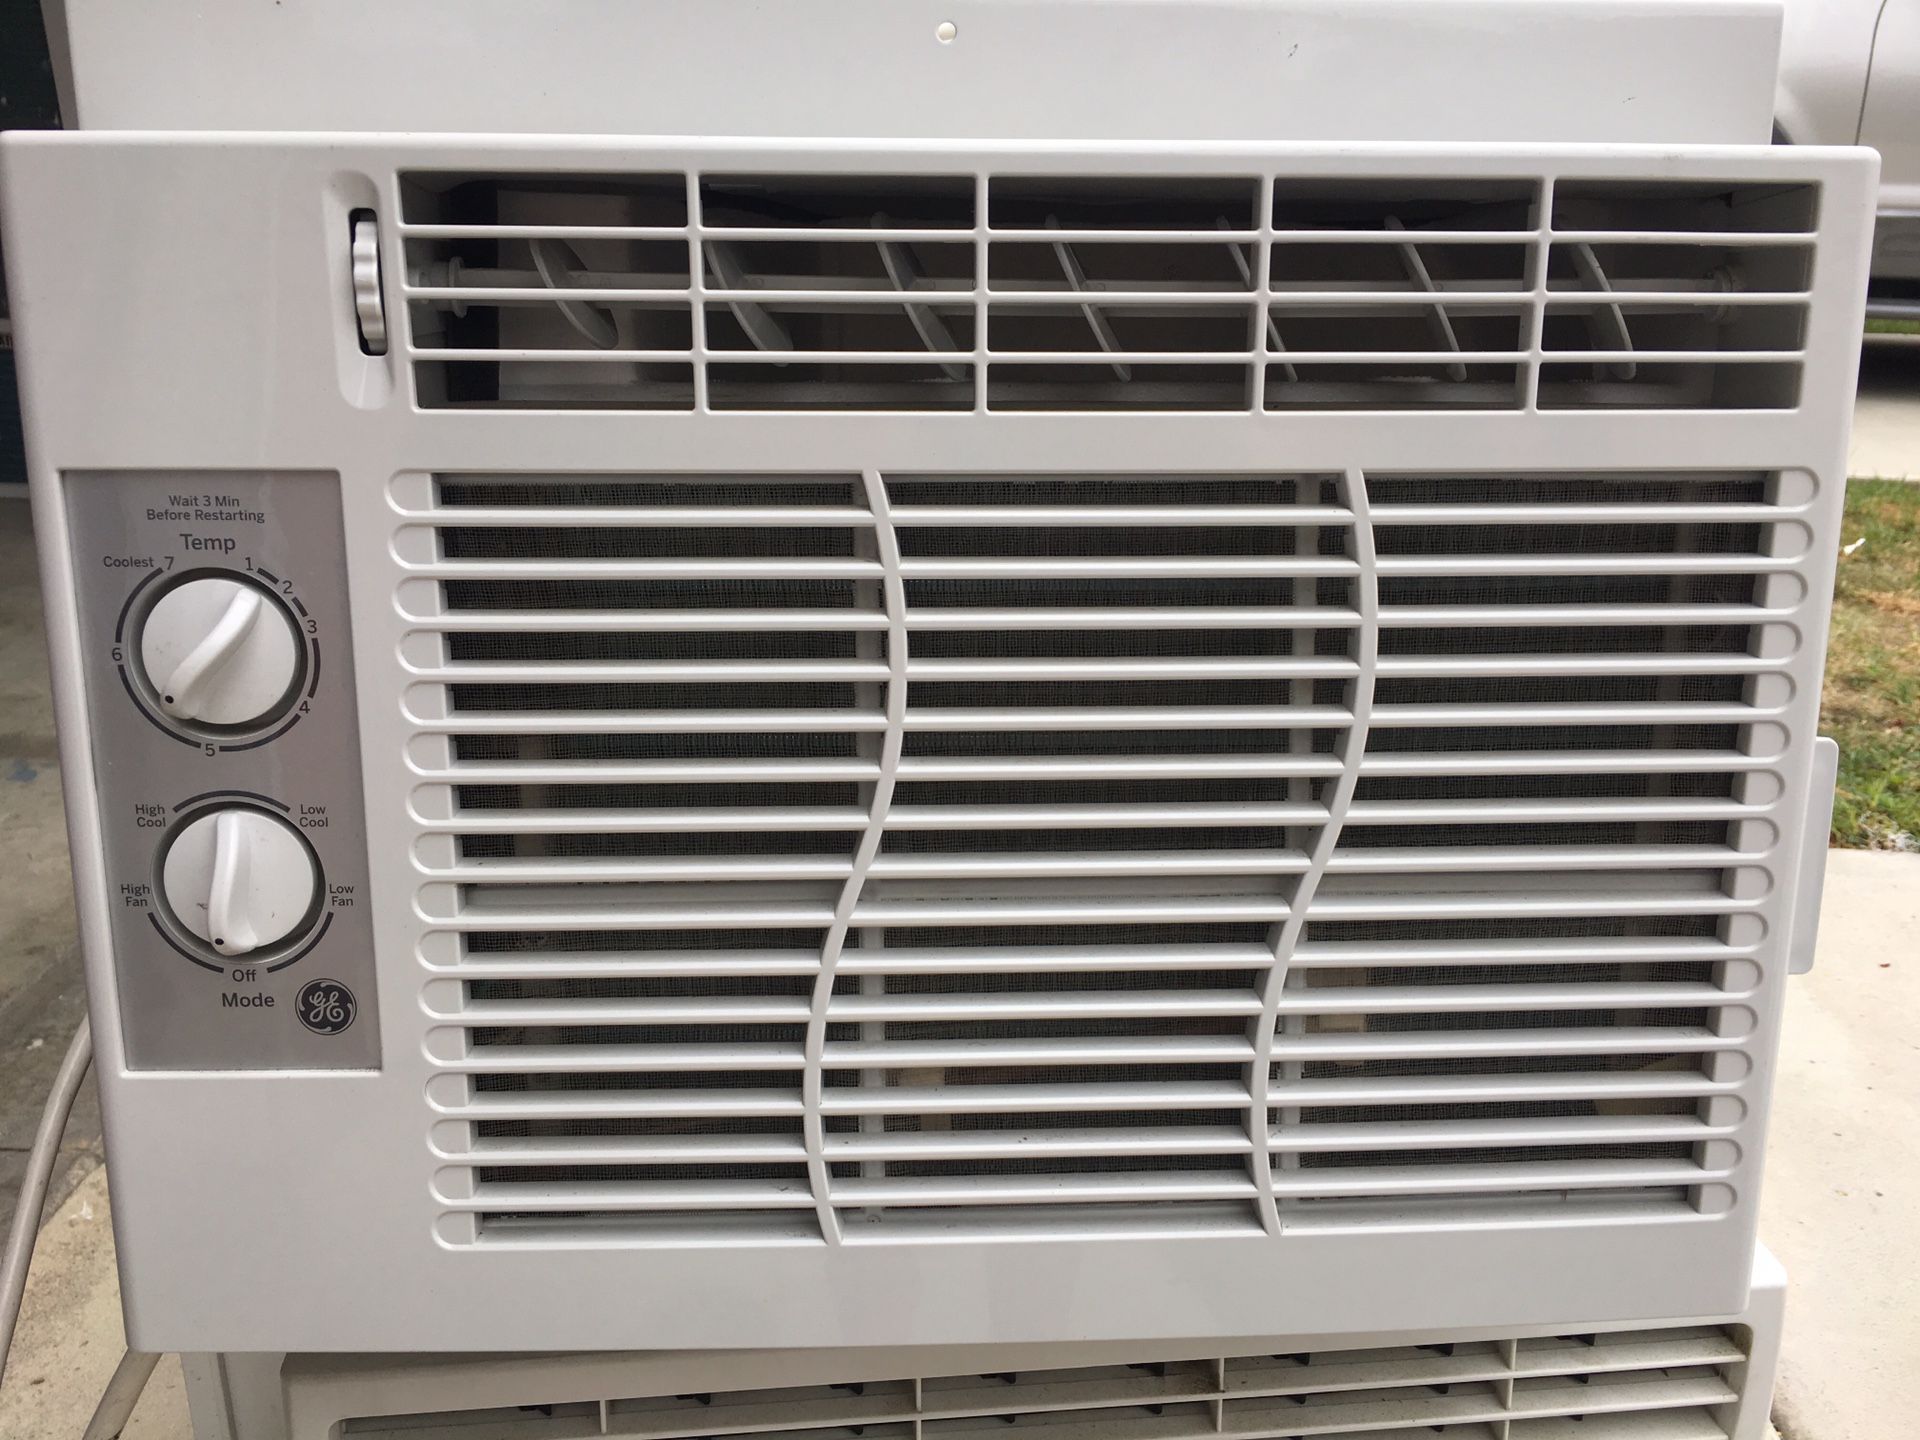 Air conditioner works excellent